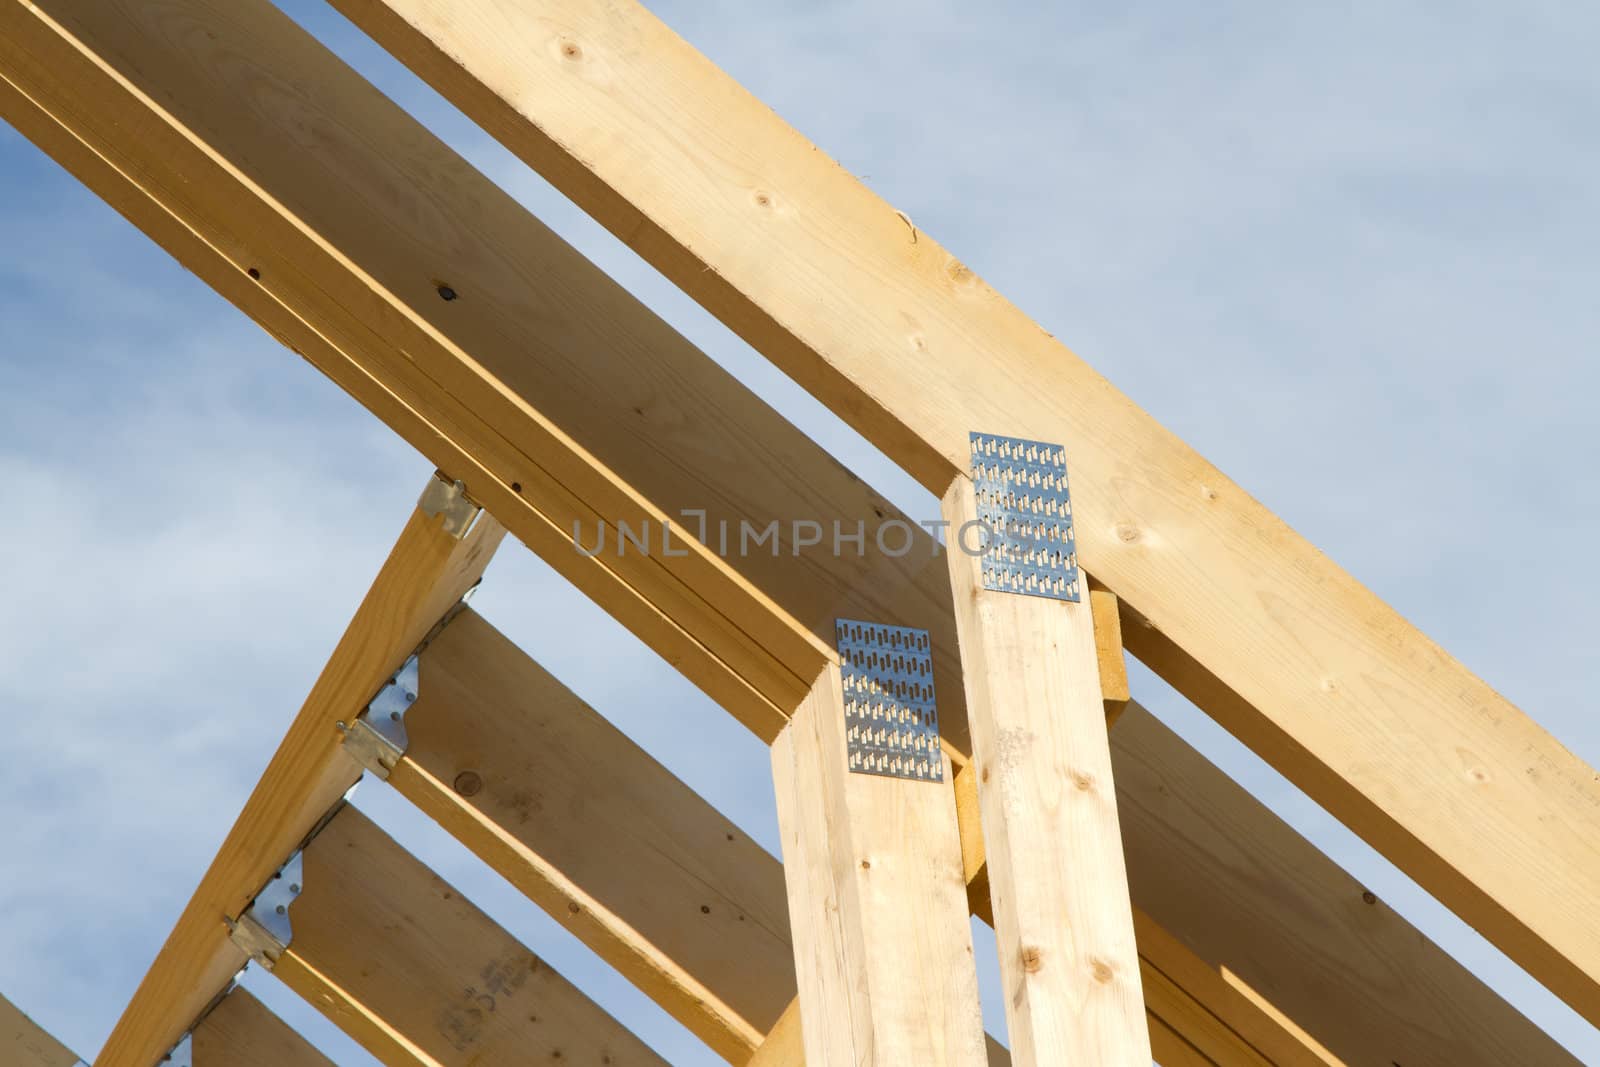 A wooden roof truss structure section with metal joiner supports.